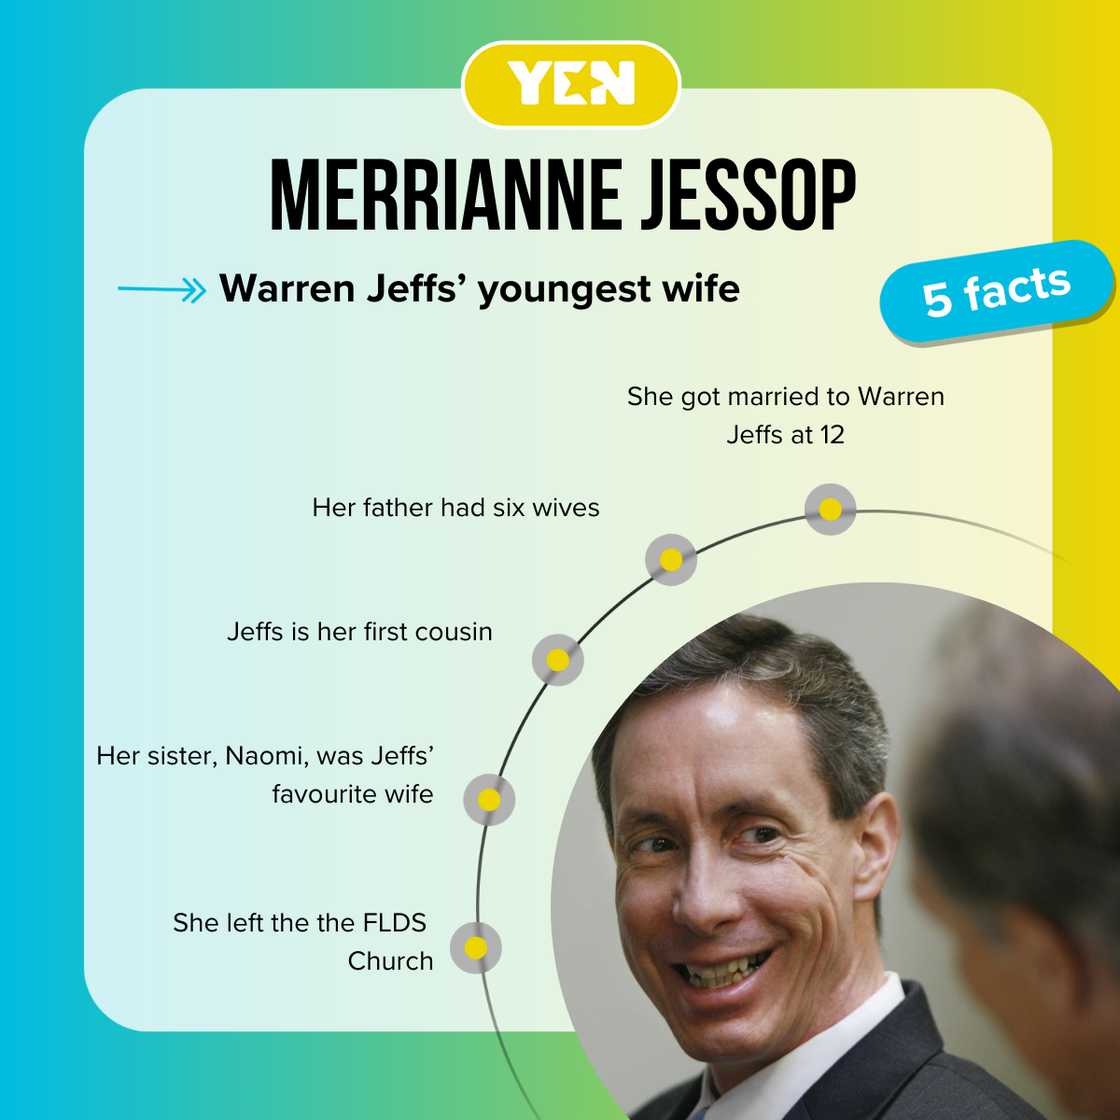 Top-5 facts about Merrianne Jessop